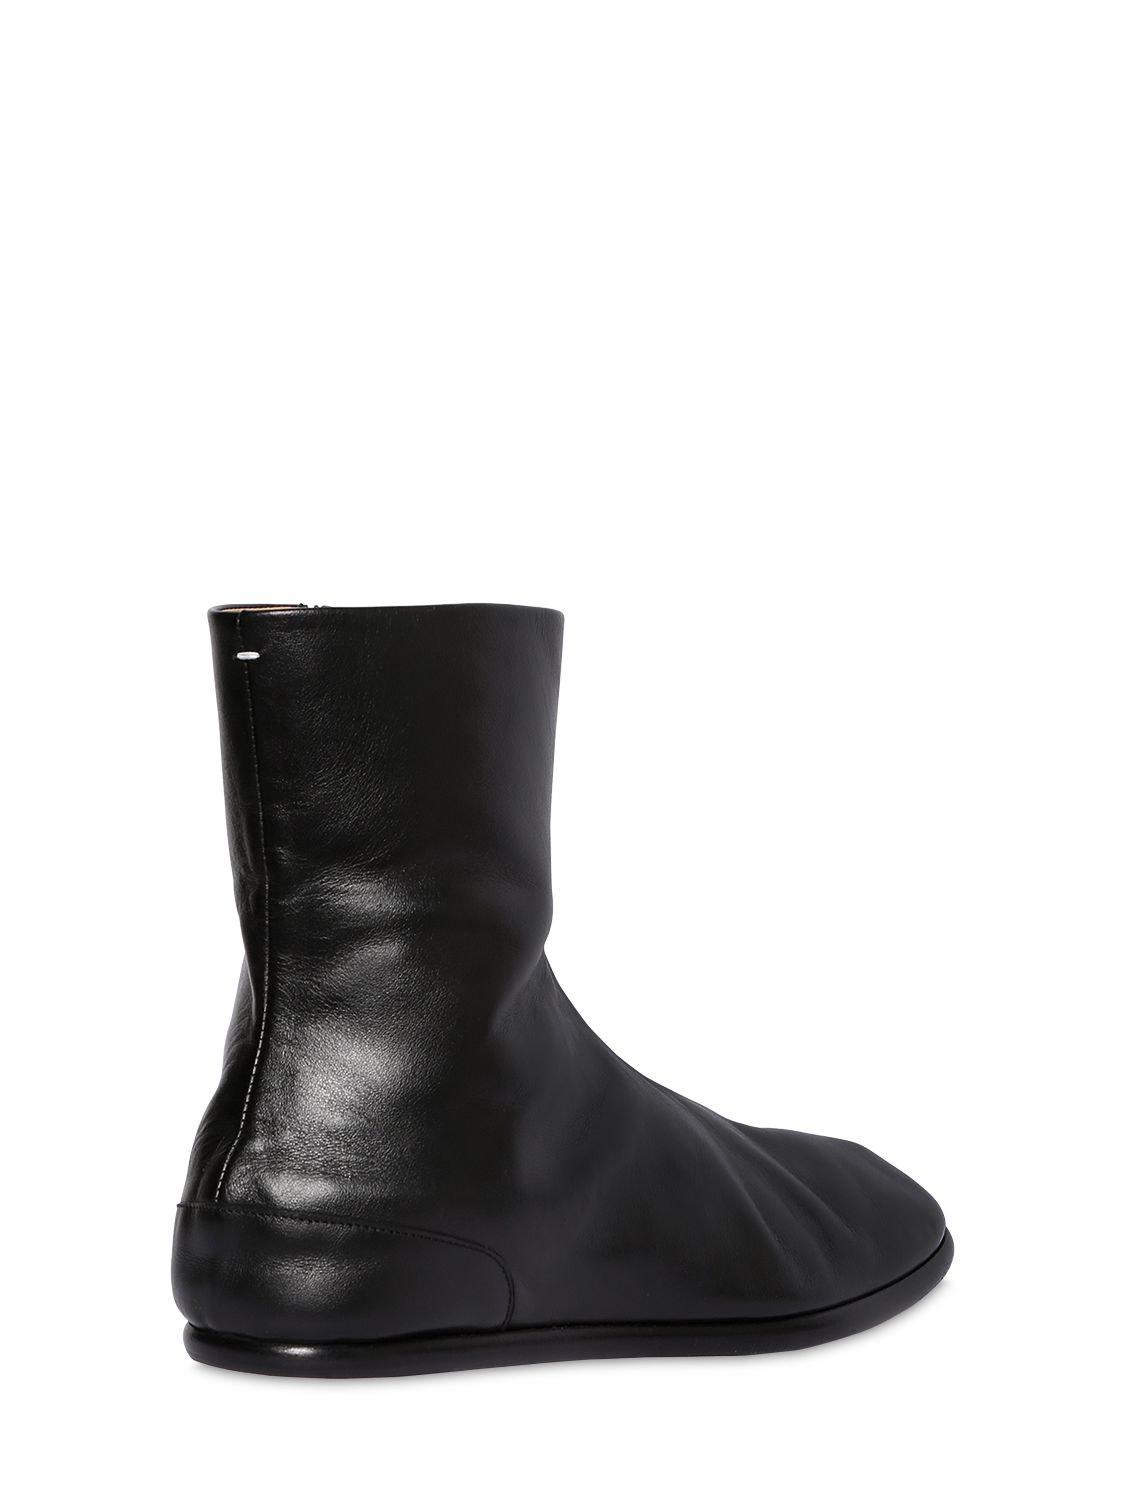 Maison Margiela Brushed Leather Tabi Boots in Black for Men - Lyst